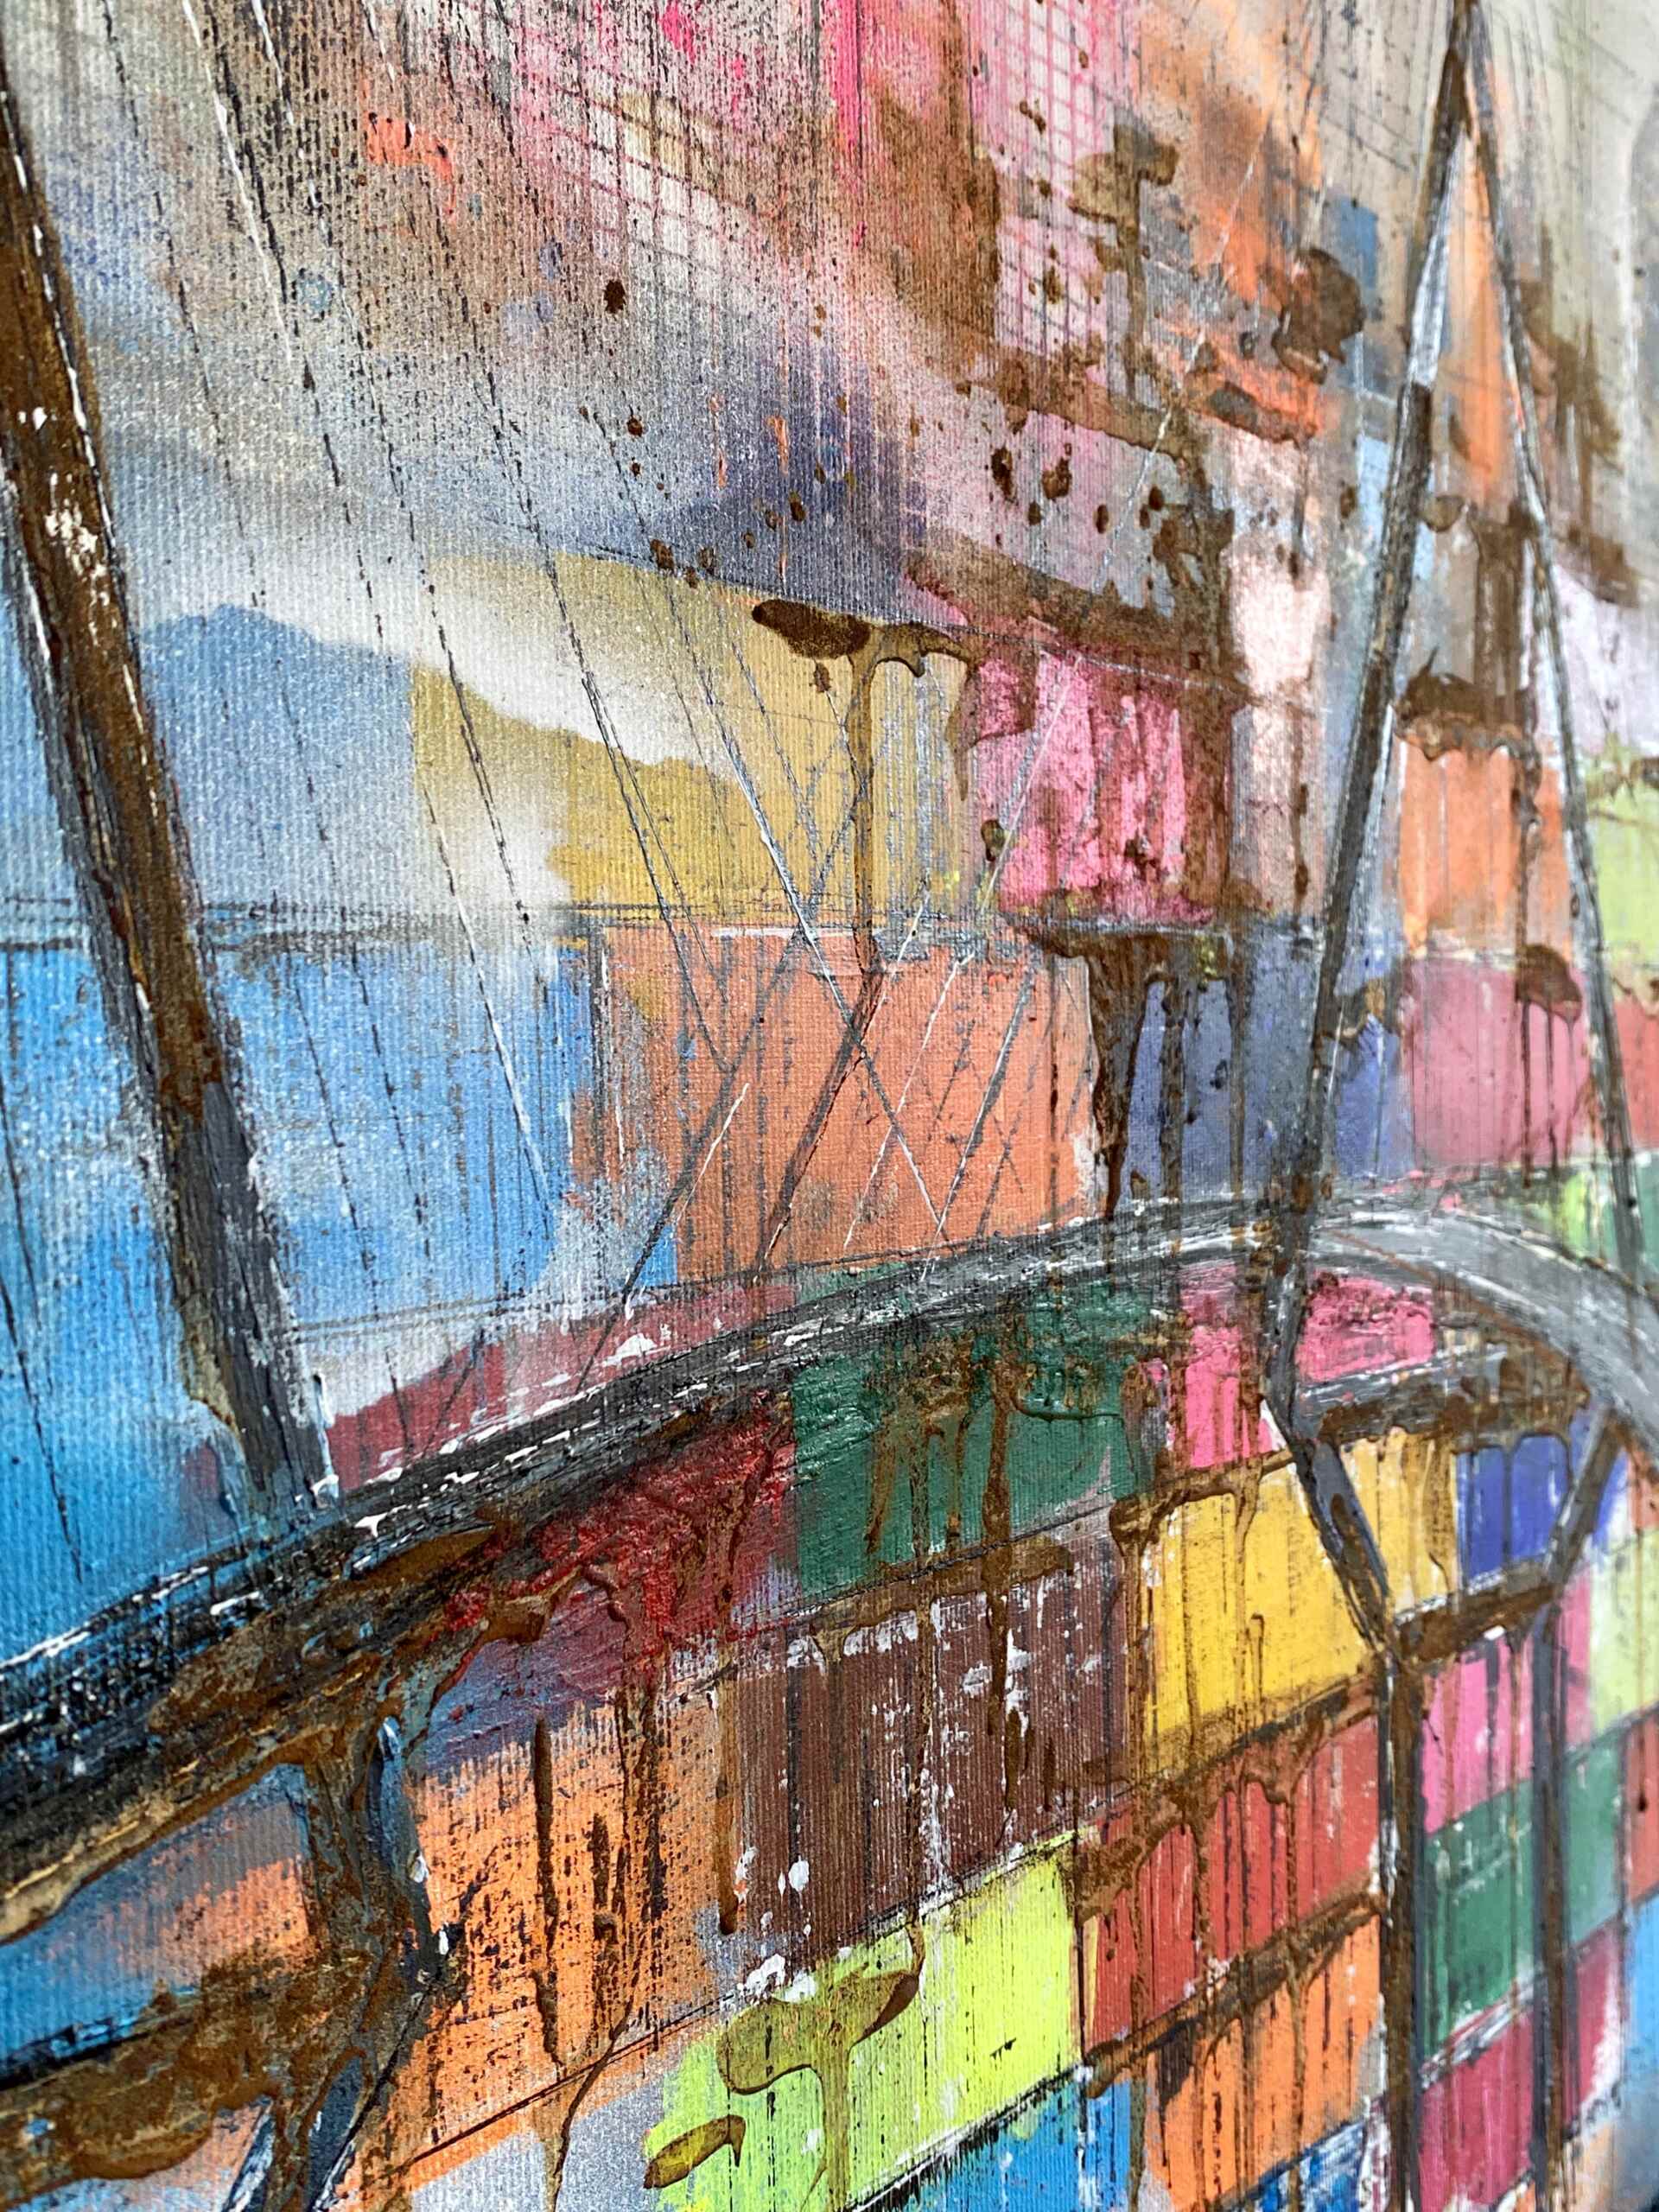 Detail of artwork "Containers" by Nina Groth